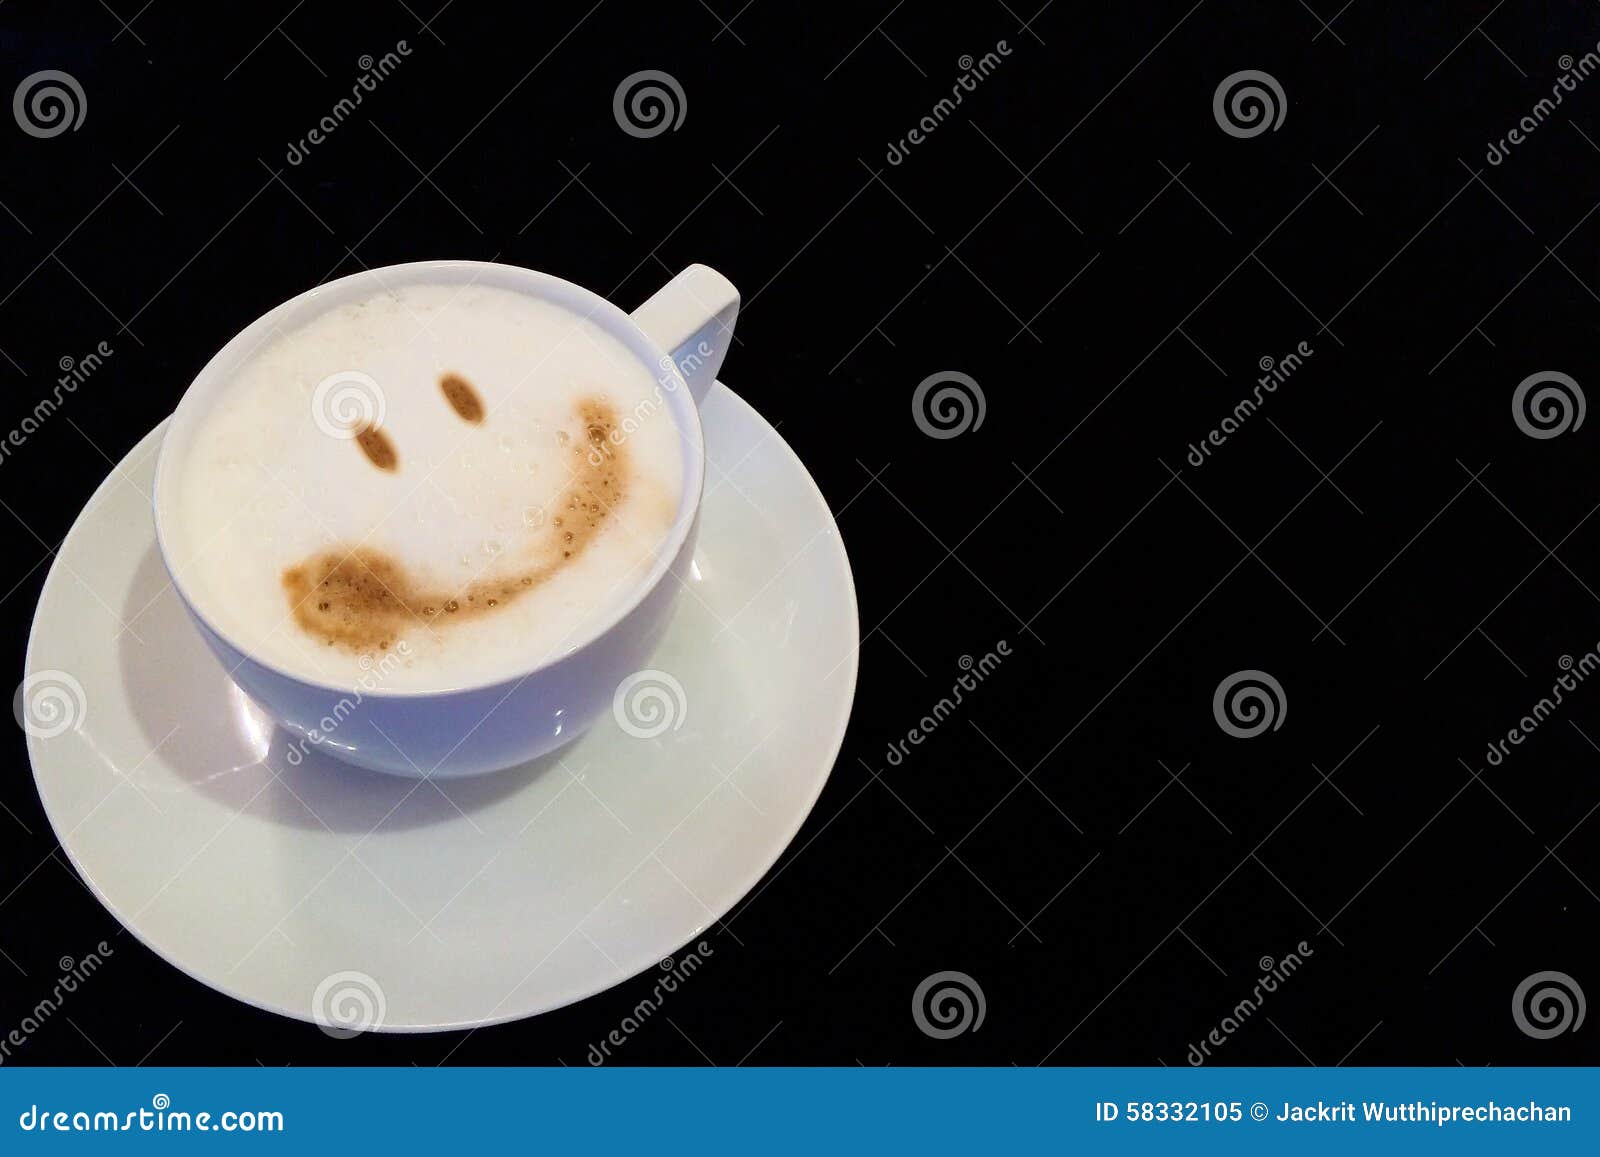 start the big day with smile concept, cup of coffee with smile face at the corner with copyspace to input text